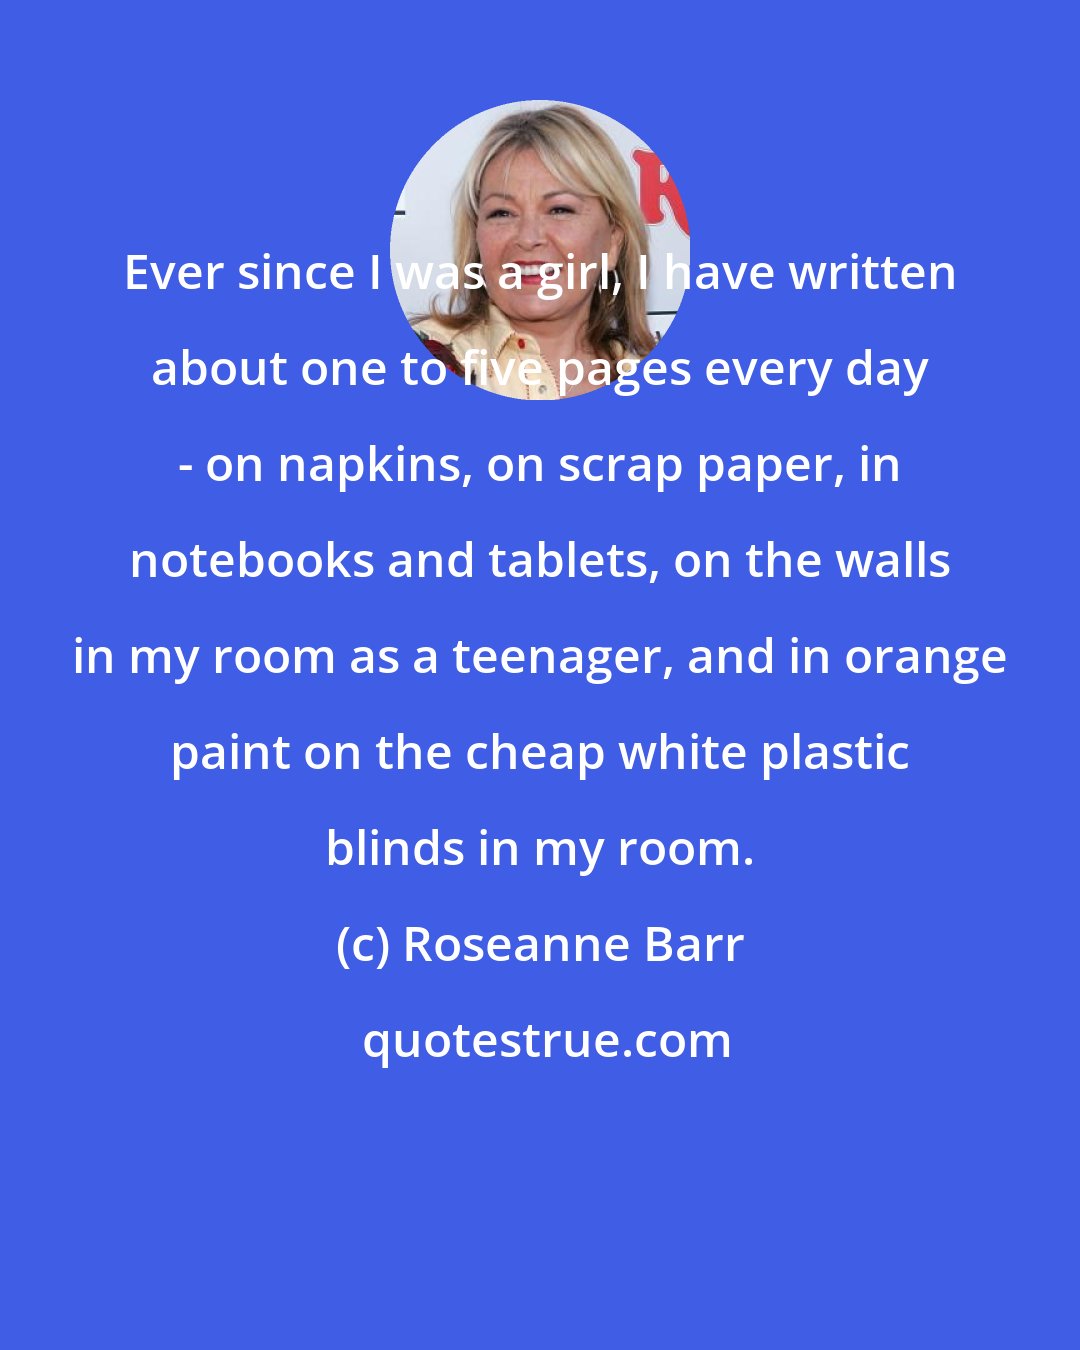 Roseanne Barr: Ever since I was a girl, I have written about one to five pages every day - on napkins, on scrap paper, in notebooks and tablets, on the walls in my room as a teenager, and in orange paint on the cheap white plastic blinds in my room.